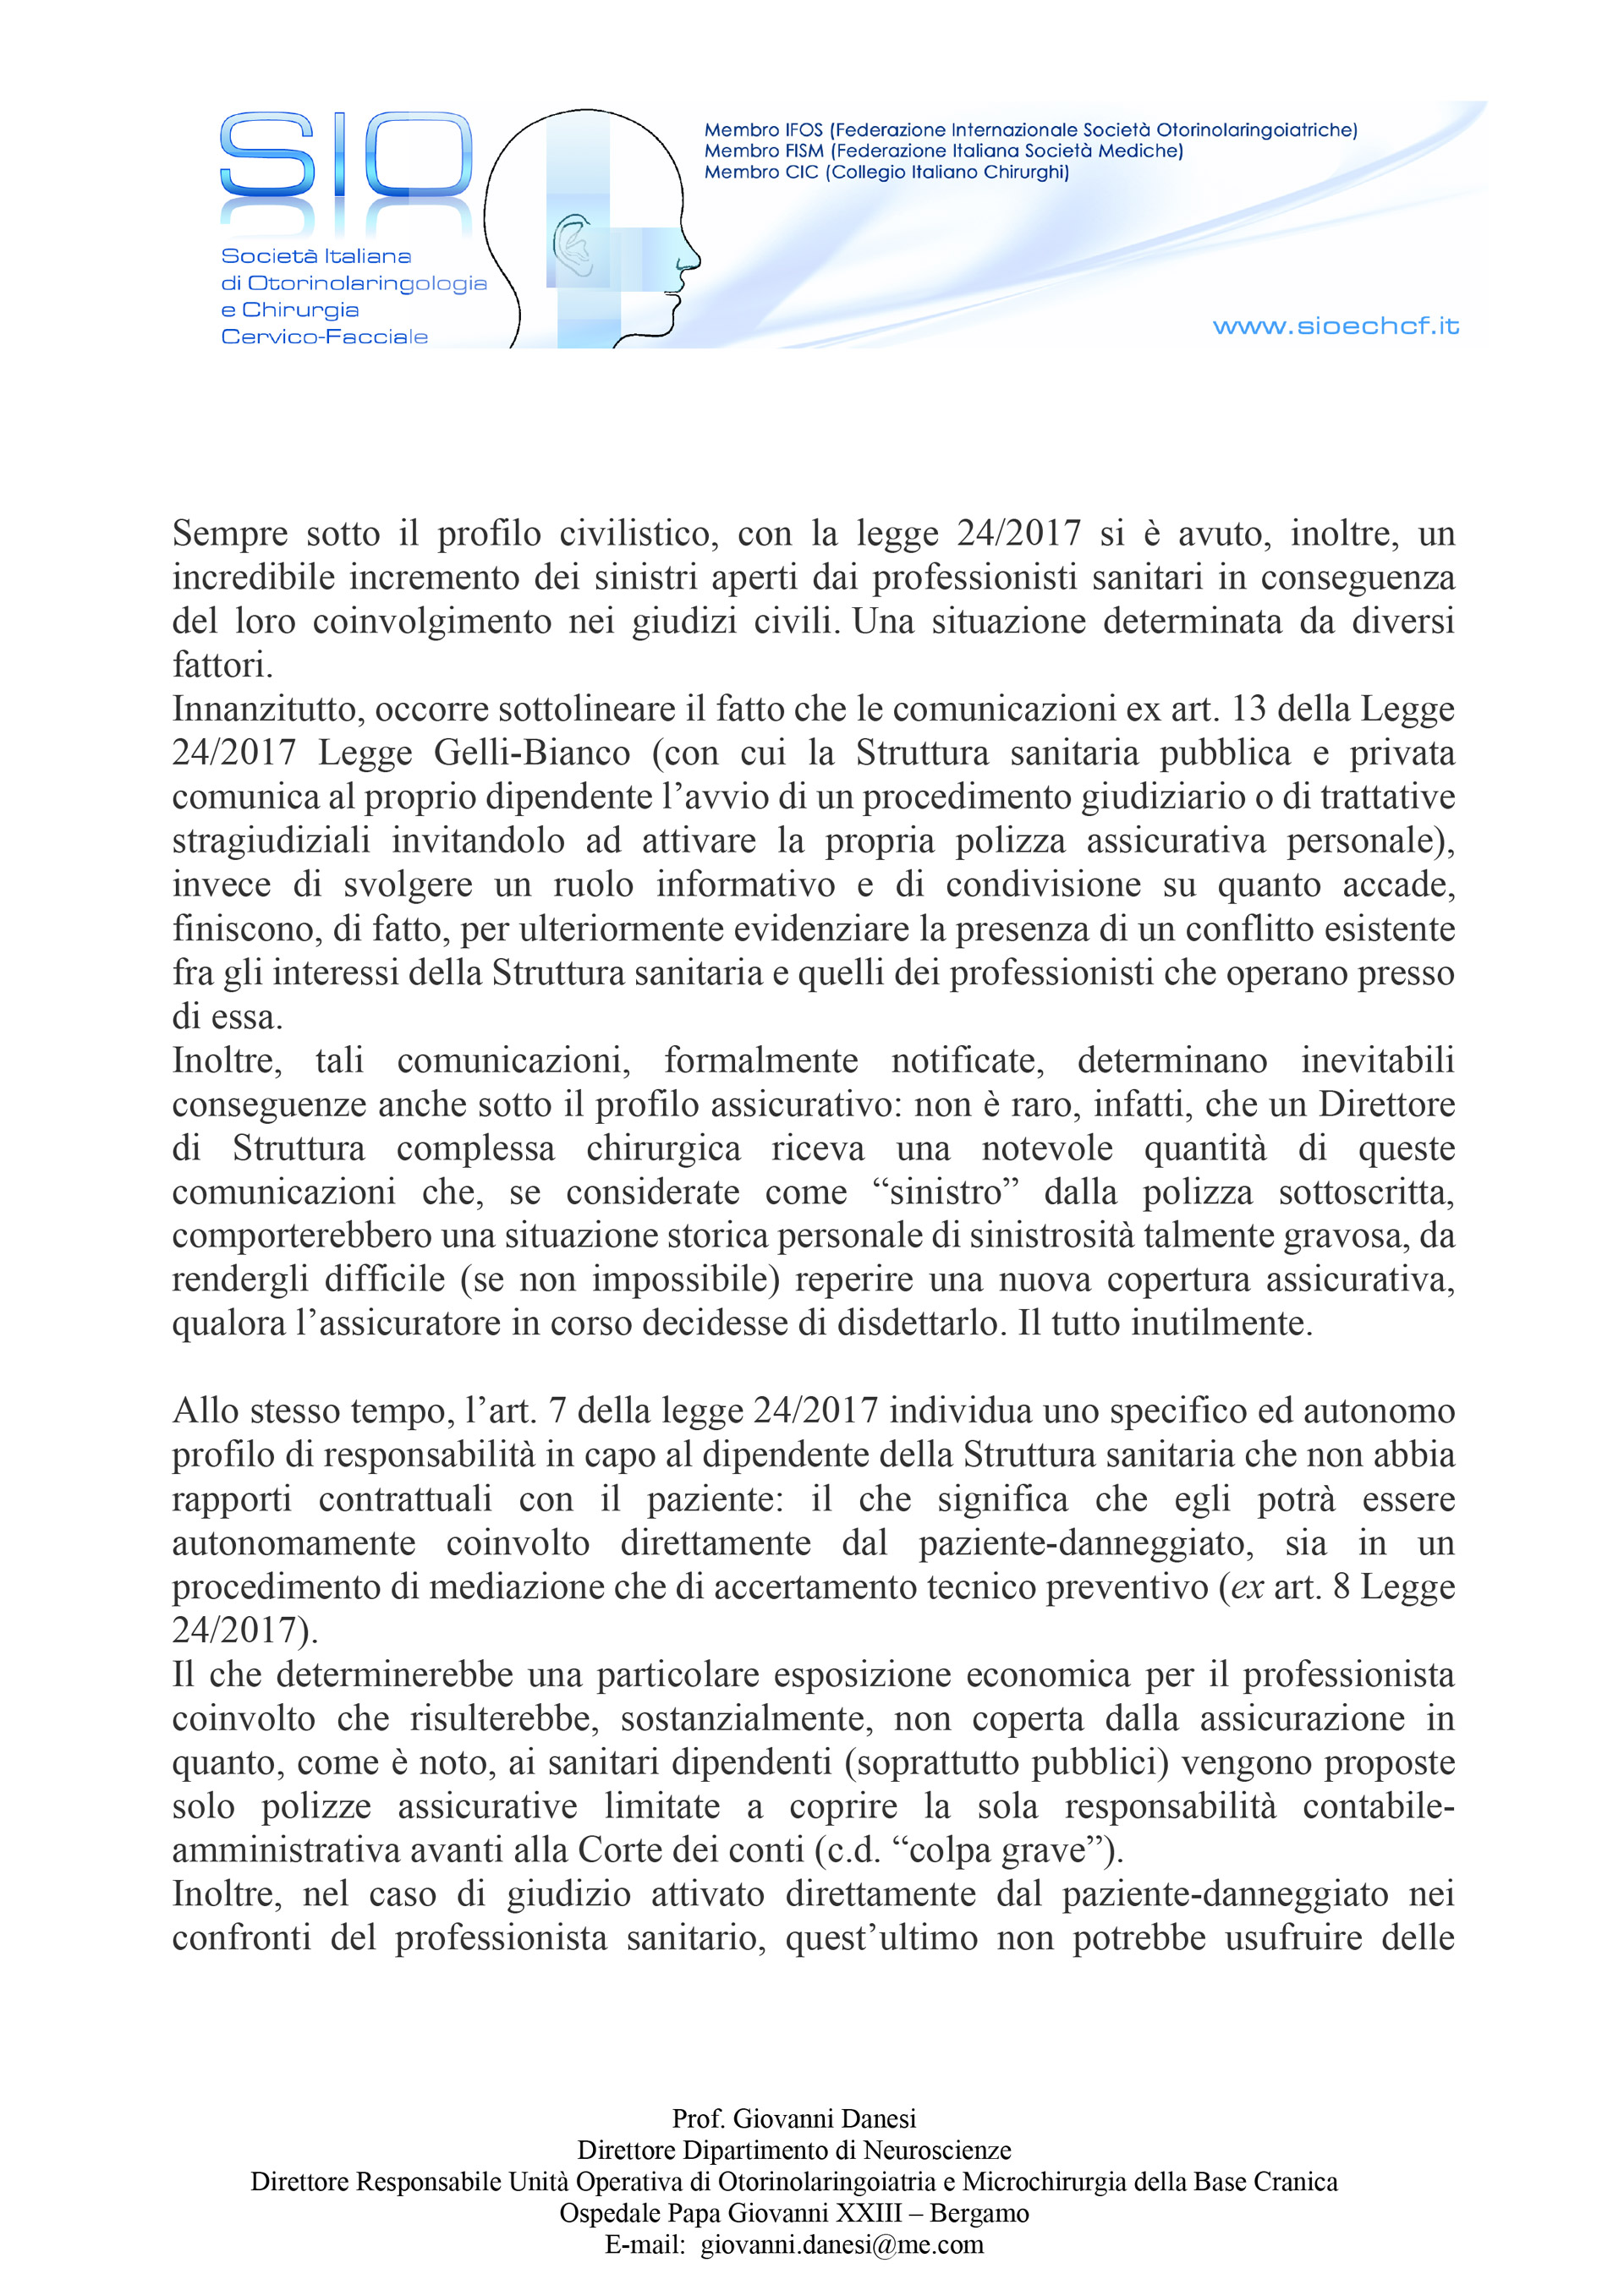 LetteraSIOperCIC-5